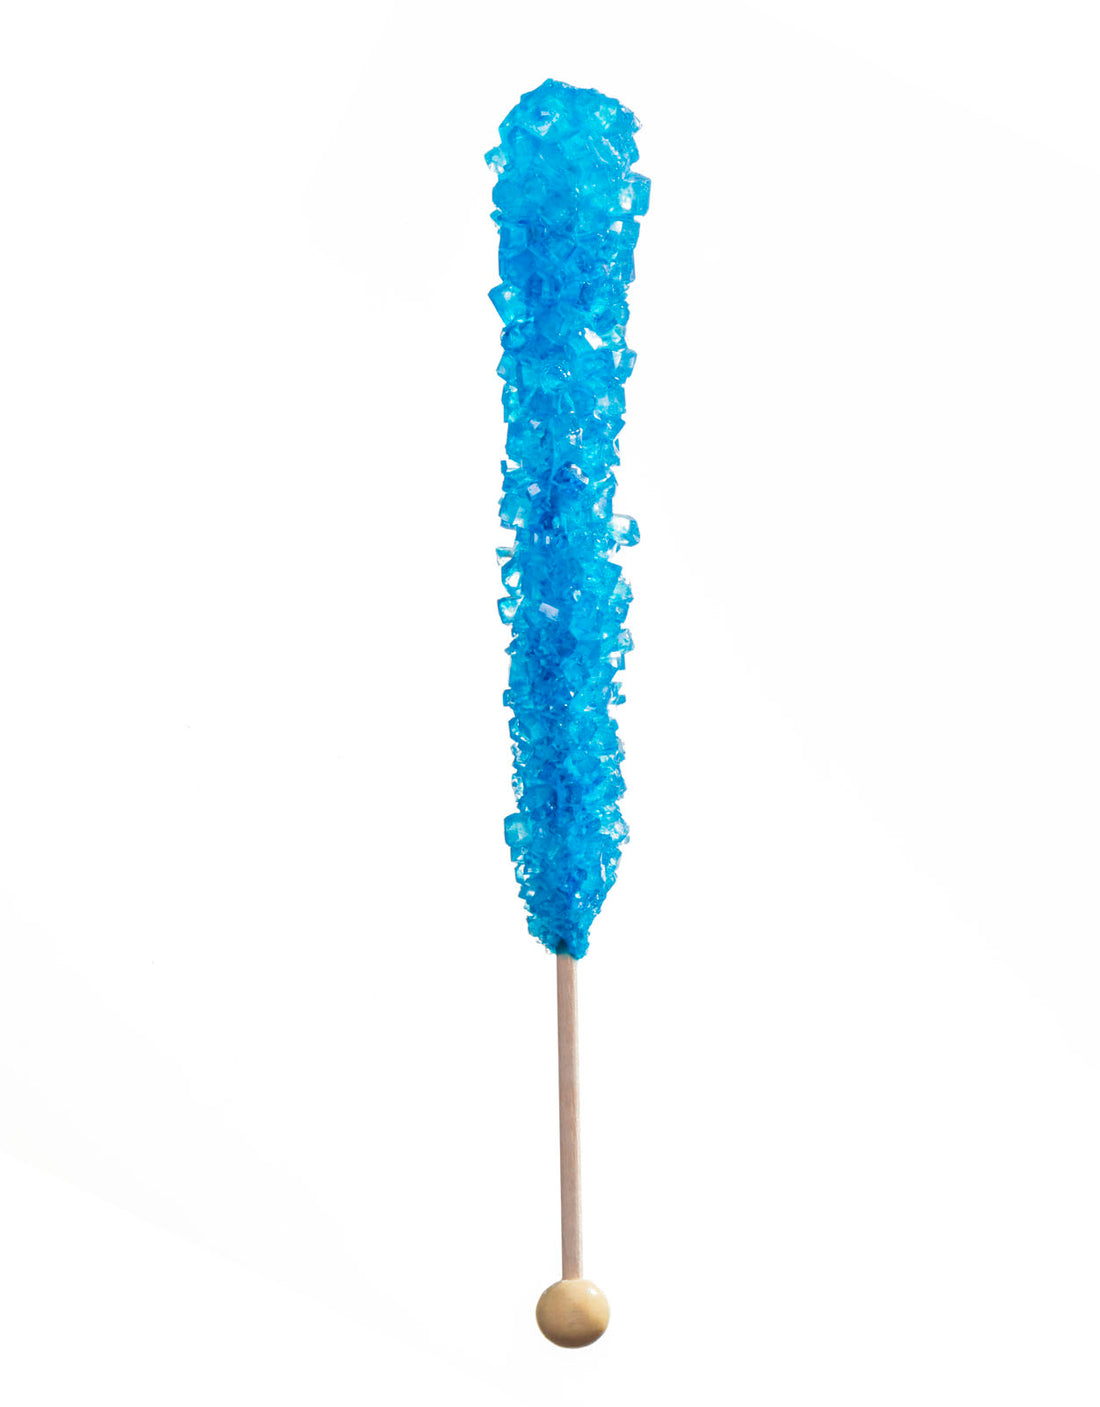 Assorted Colors Rock Candy Sugar Sticks - Assorted Flavors